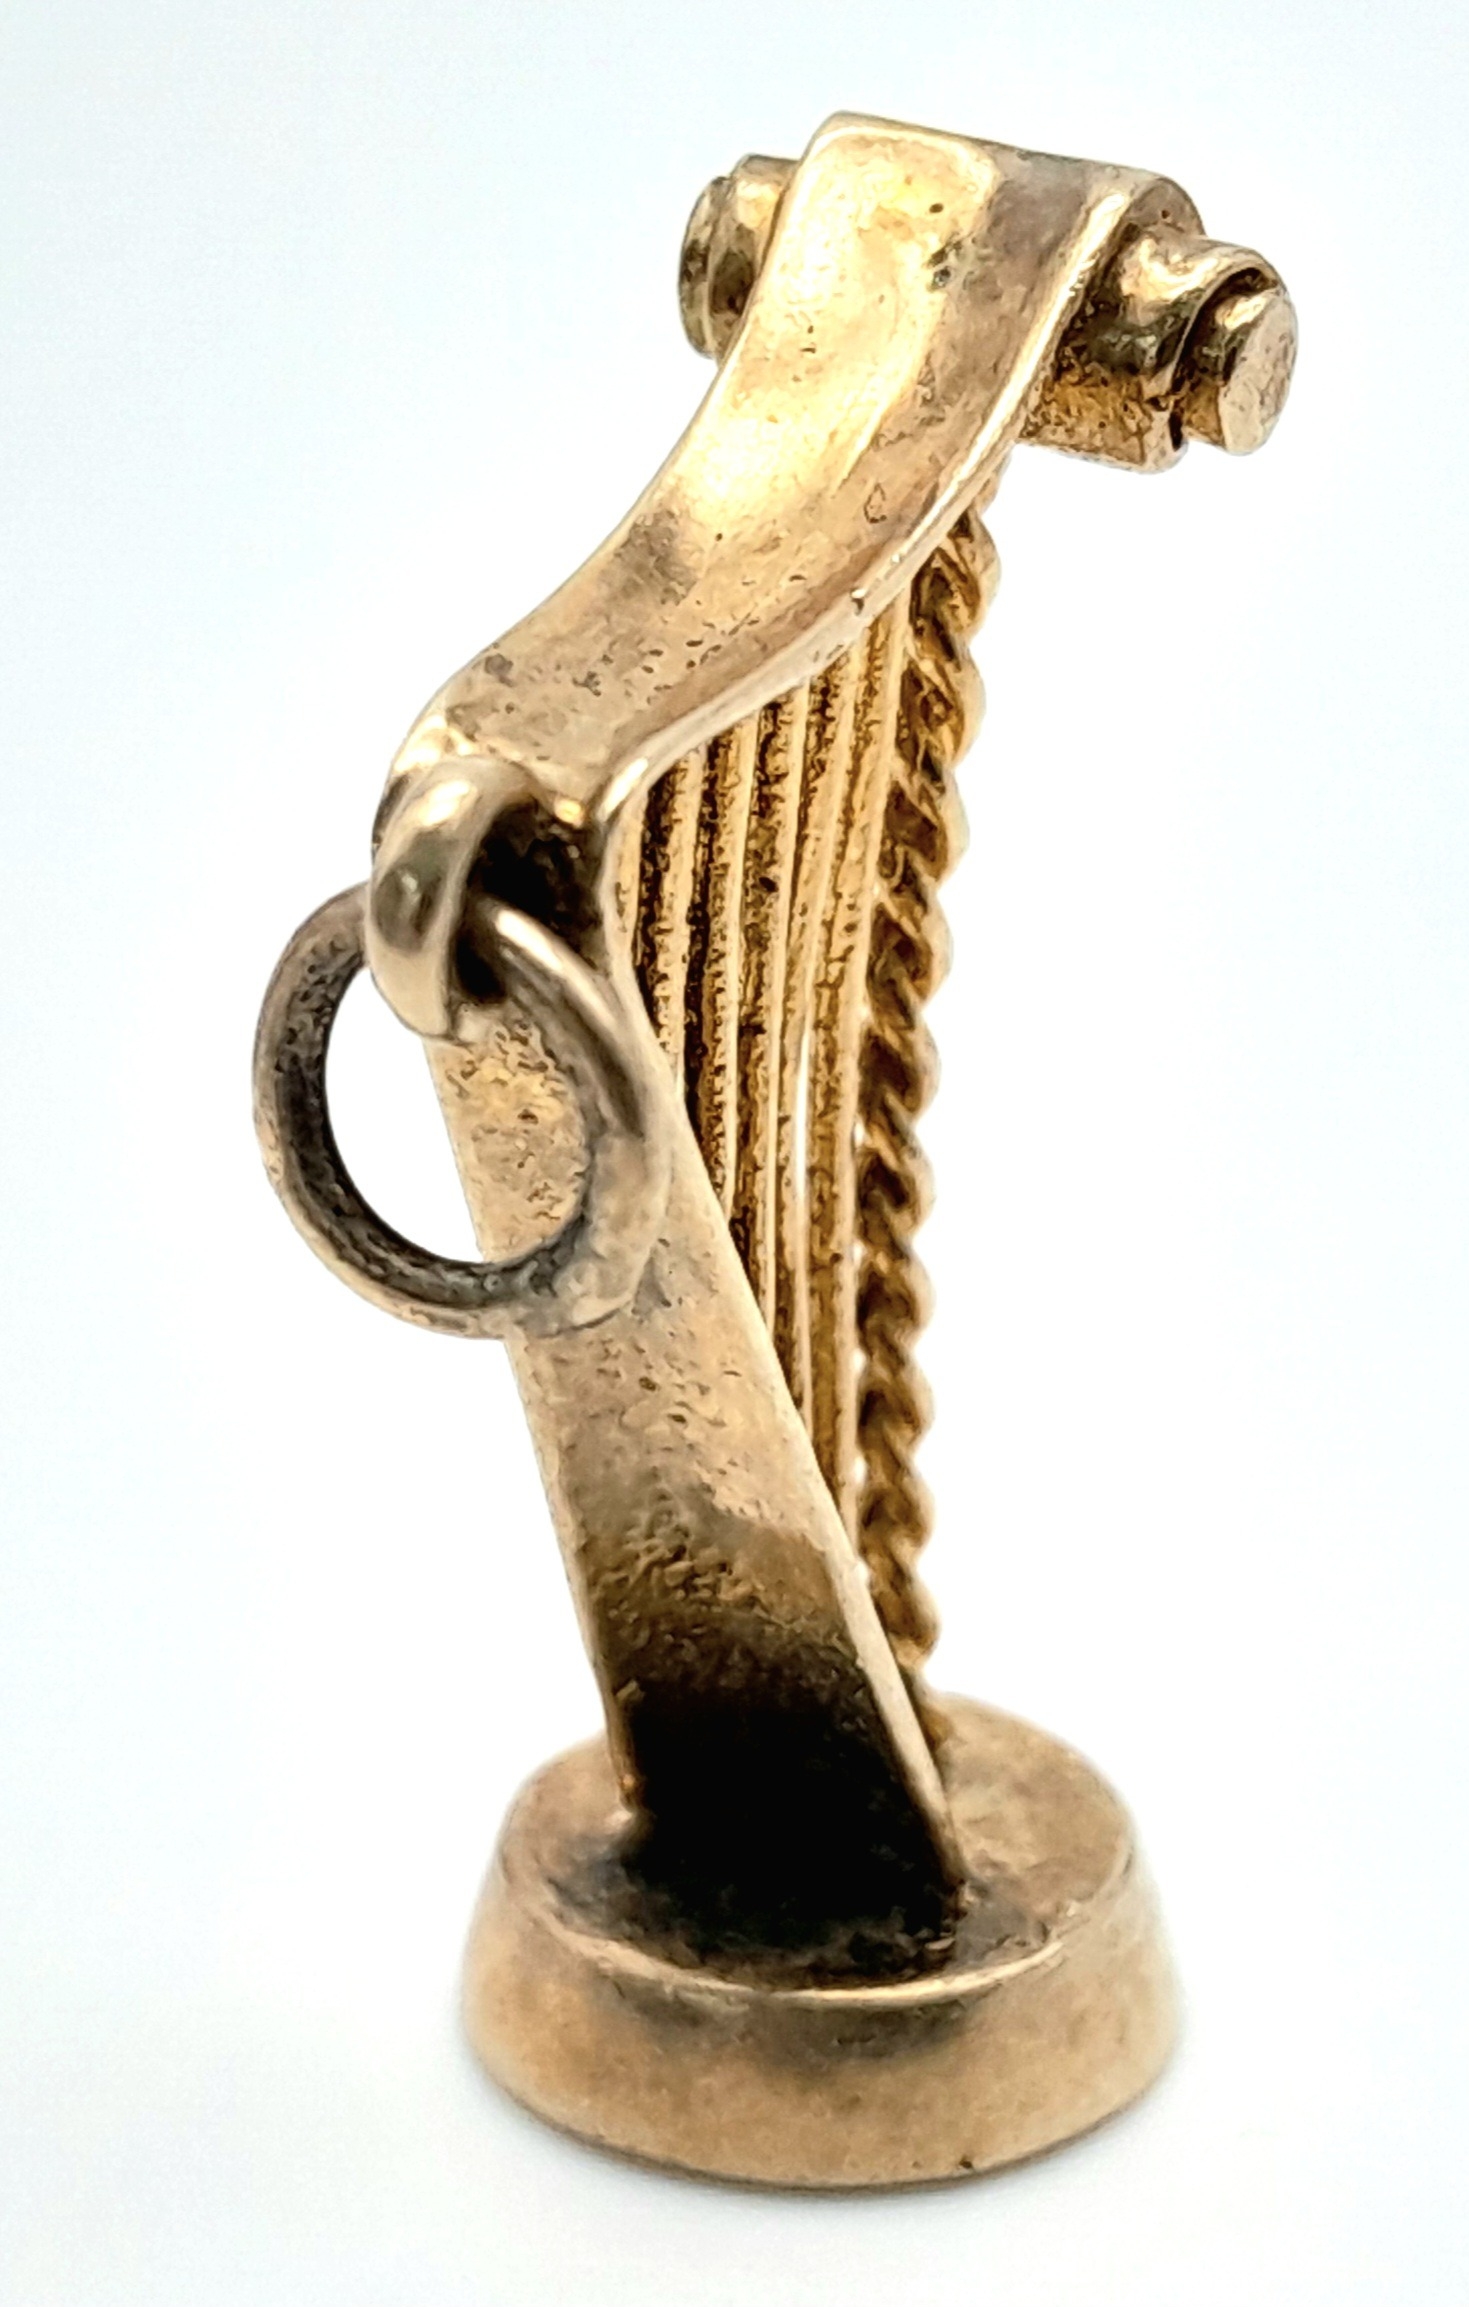 A 9K YELLOW GOLD IRISH HARP CHARM, POSSIBLY GUINESS THEMED. 2.9cm length, 4.2g weight. Ref: SC 8137 - Image 3 of 6